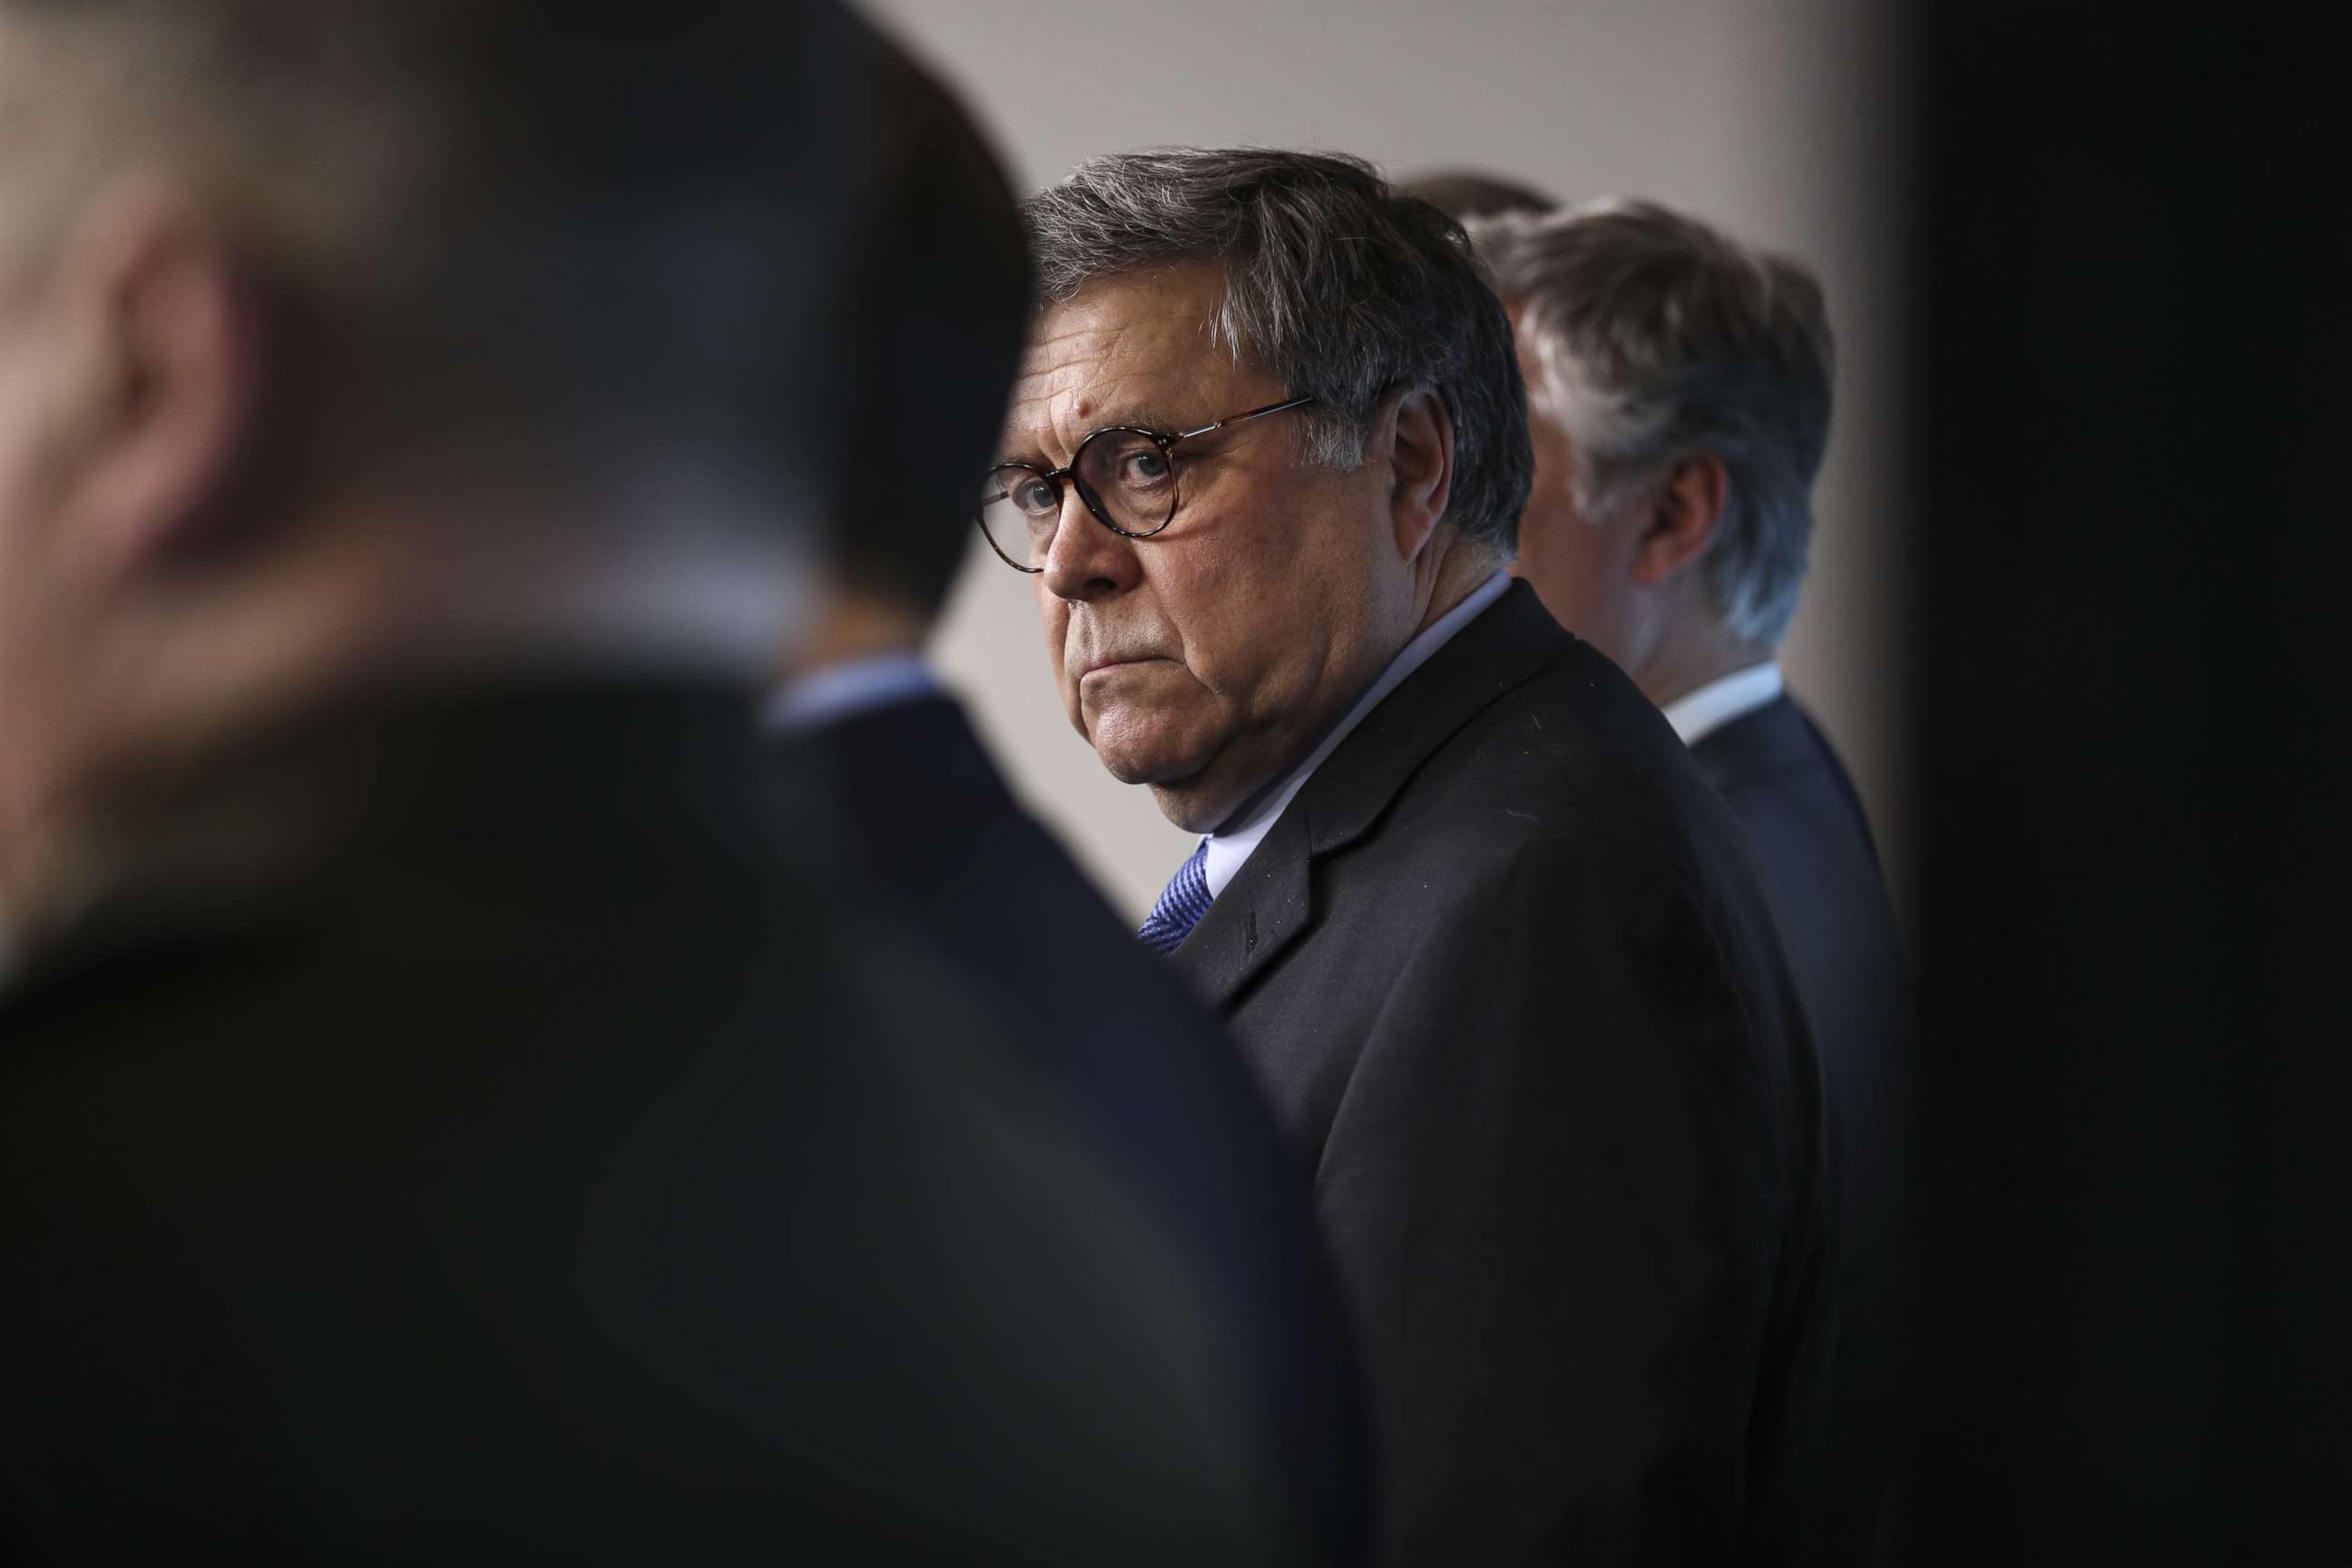 PHOTO: Attorney General William Barr listens during a Coronavirus Task Force news conference at the White House in Washington, April 1, 2020.